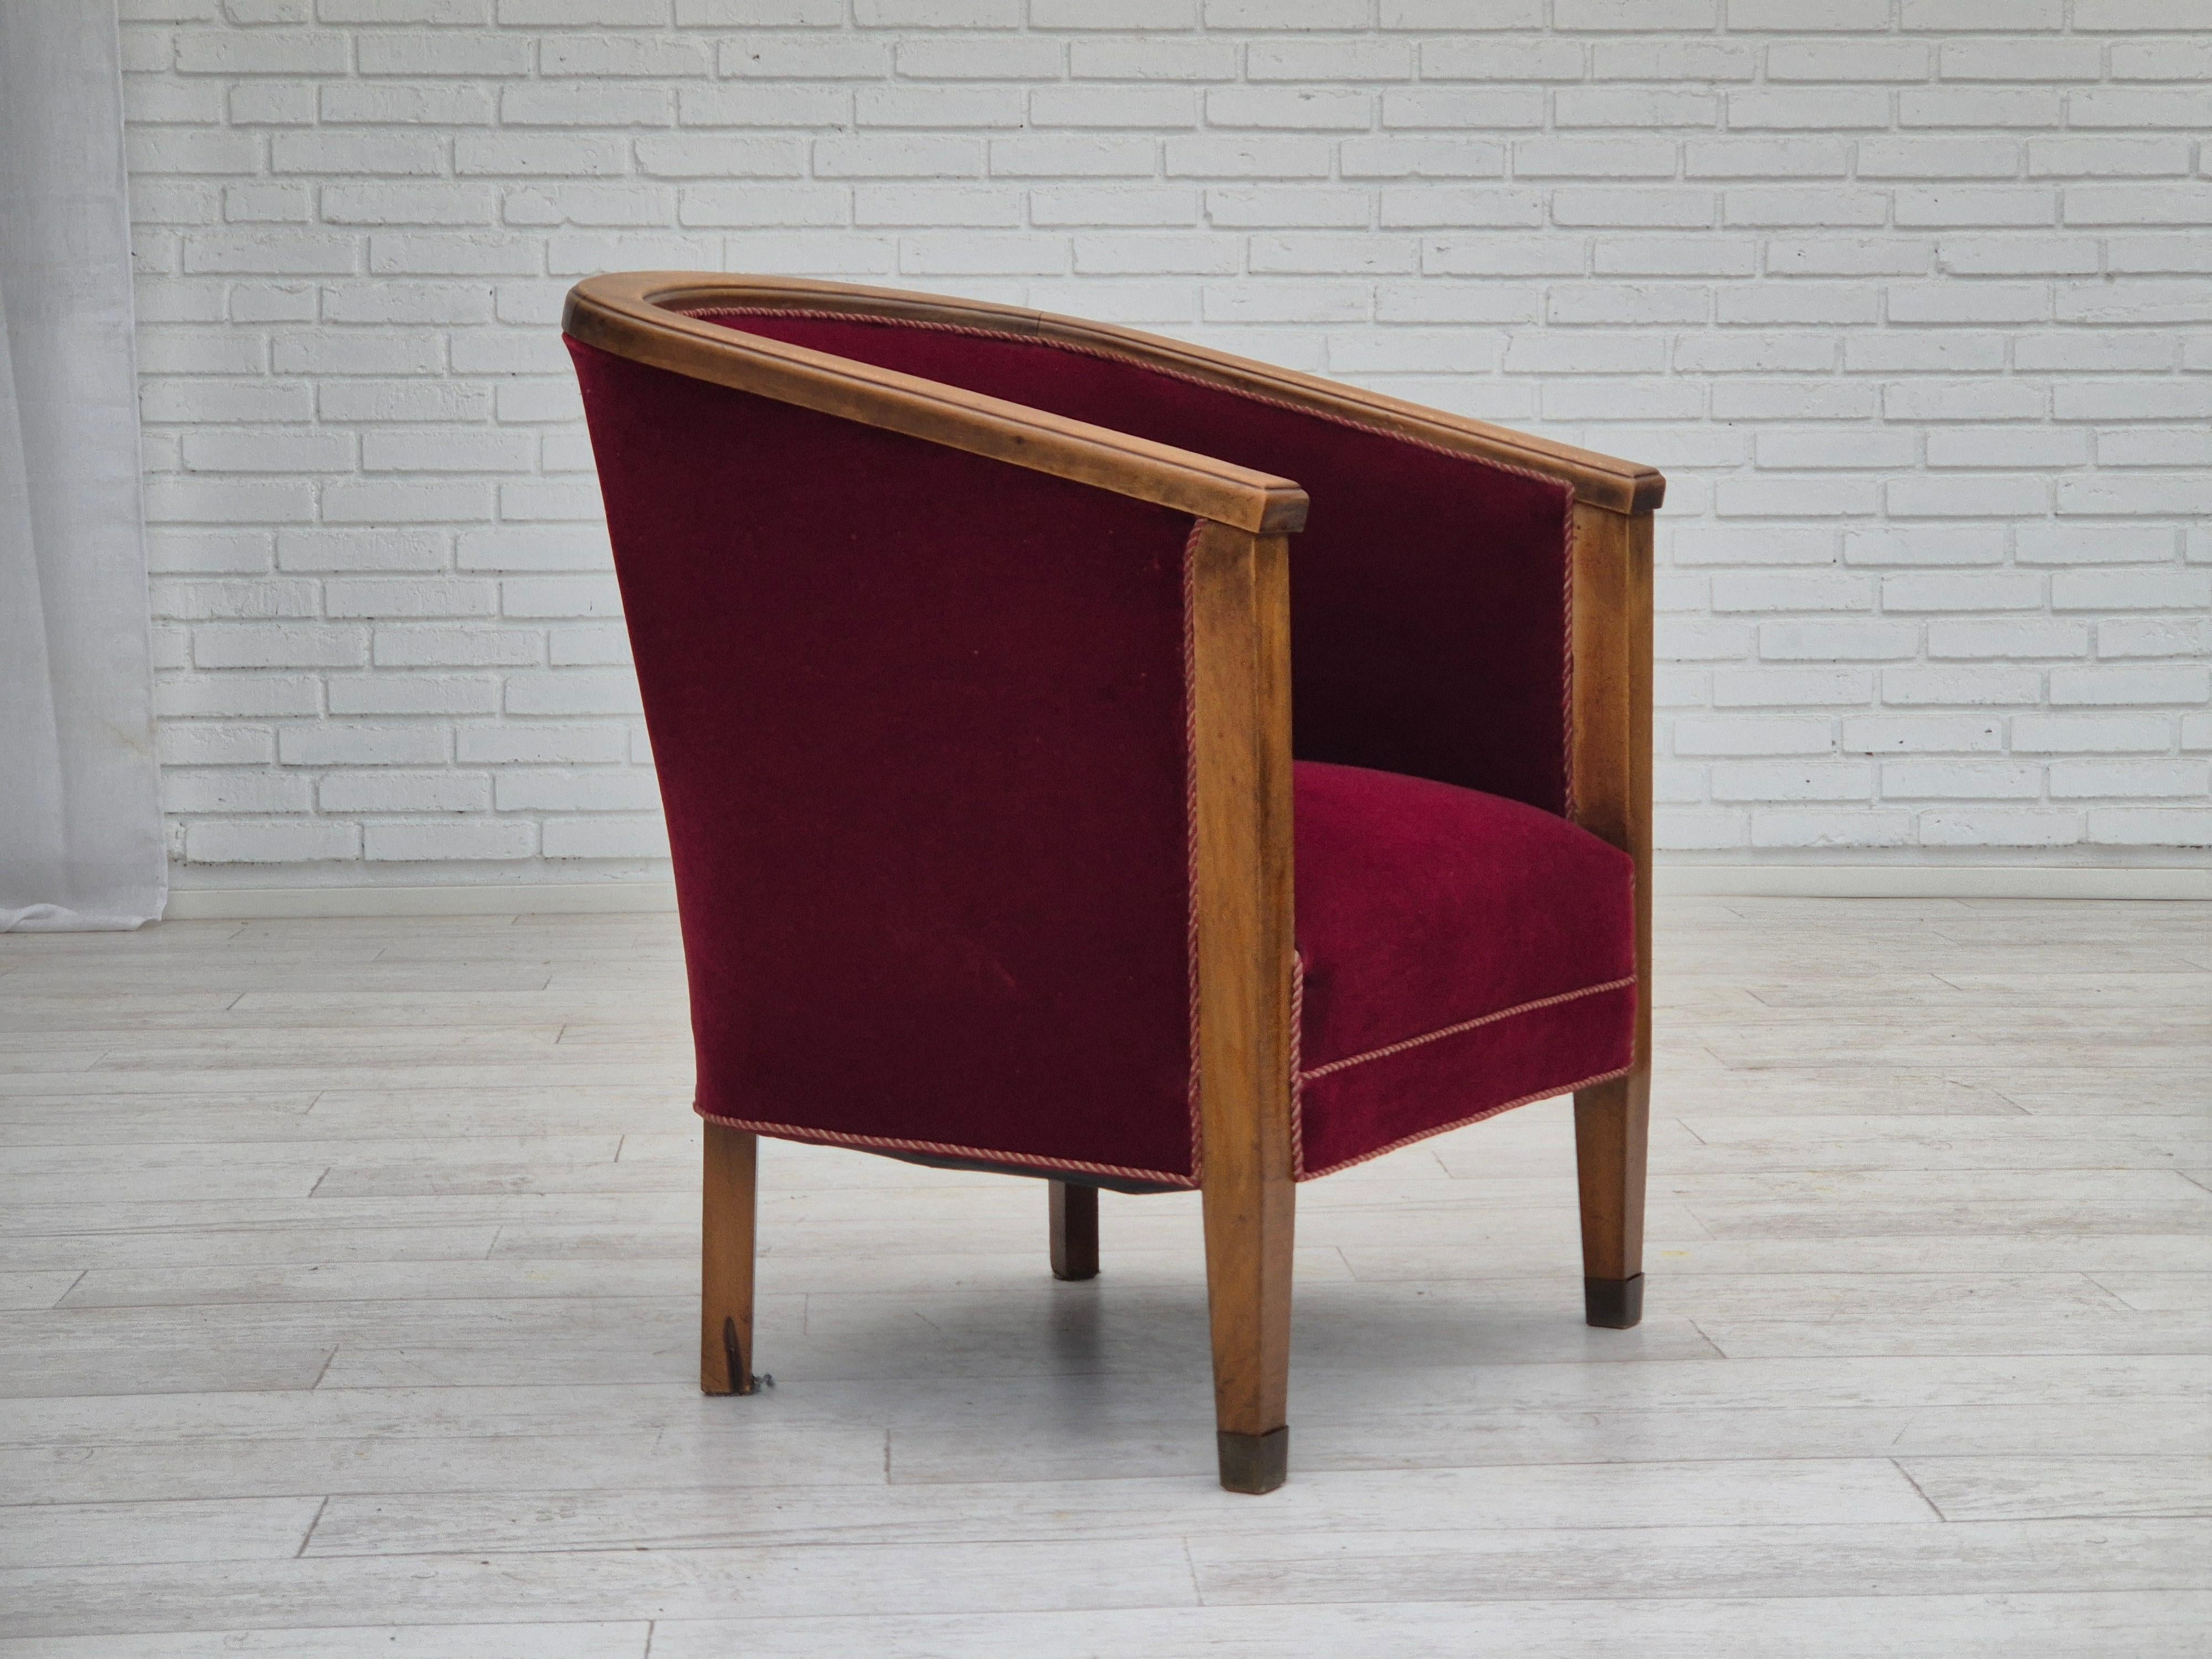 1950s, Danish armchair in original very good condition: no smells and no stains. Cherry-red furniture velour, beech wood with brass plugs on the front legs. Springs in the seat. Manufactured in about 1950-55s.